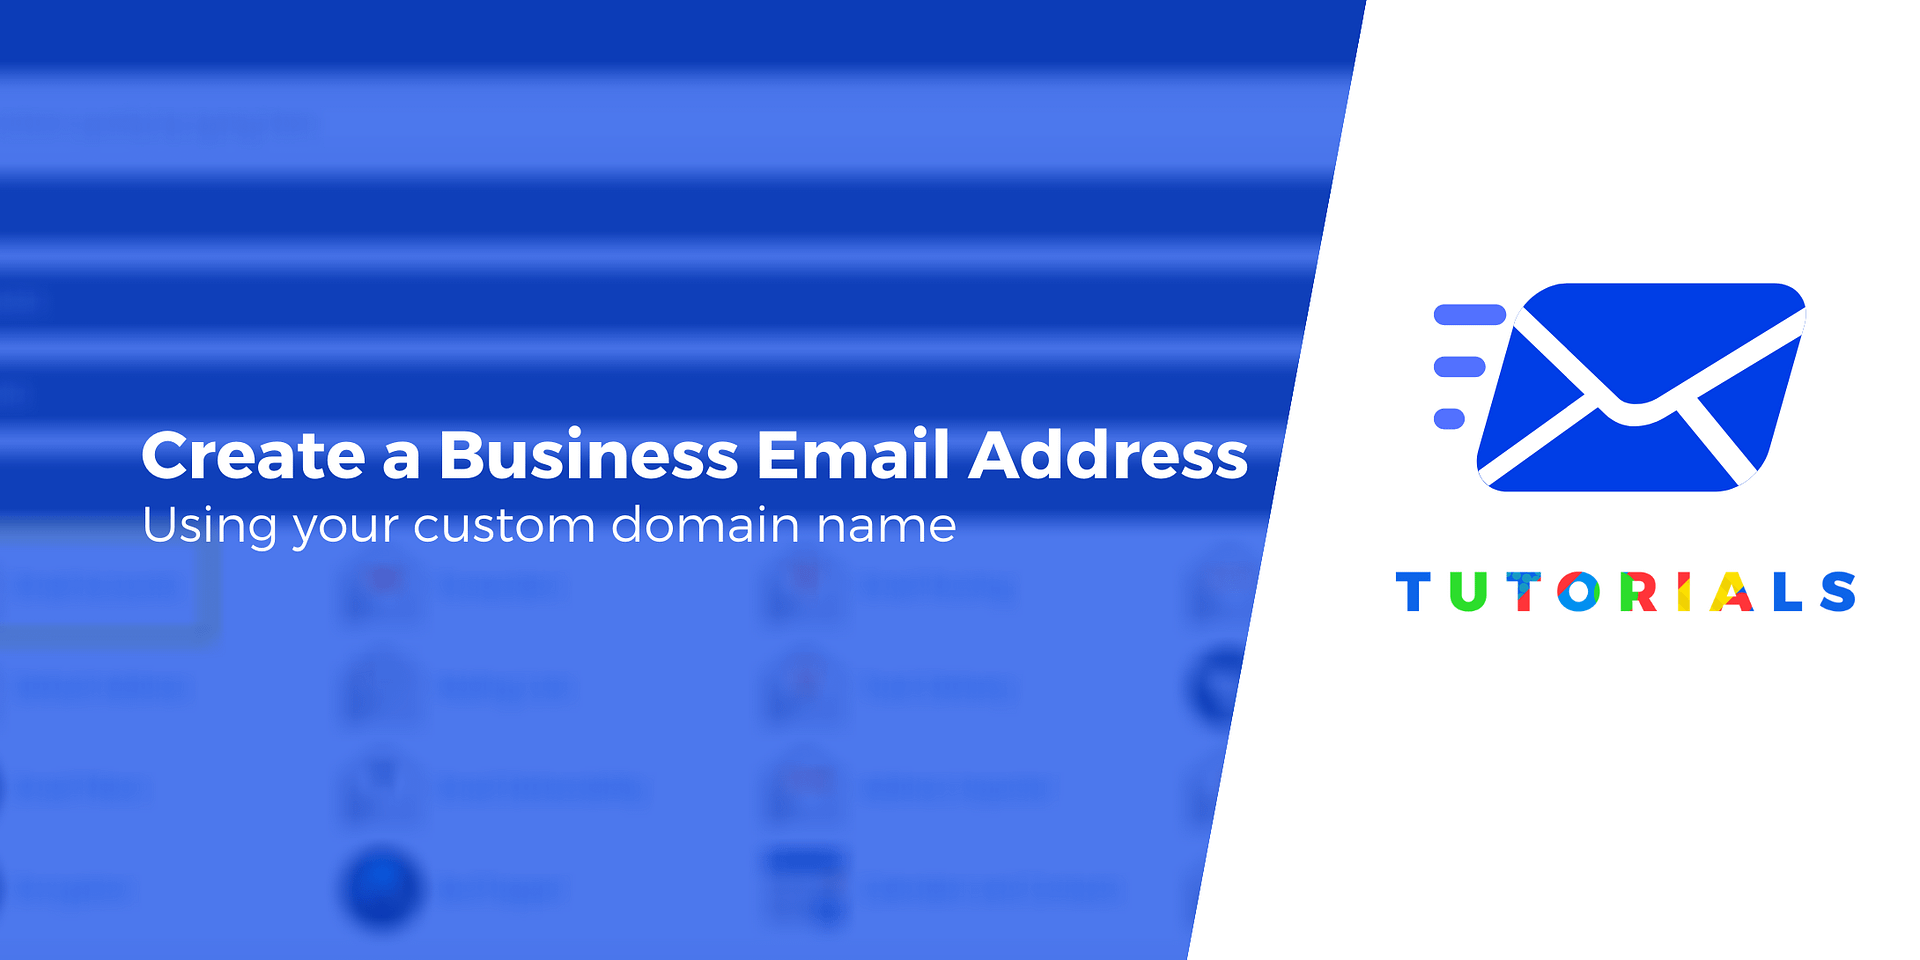 How to Create a Business Email Address With a Custom Domain